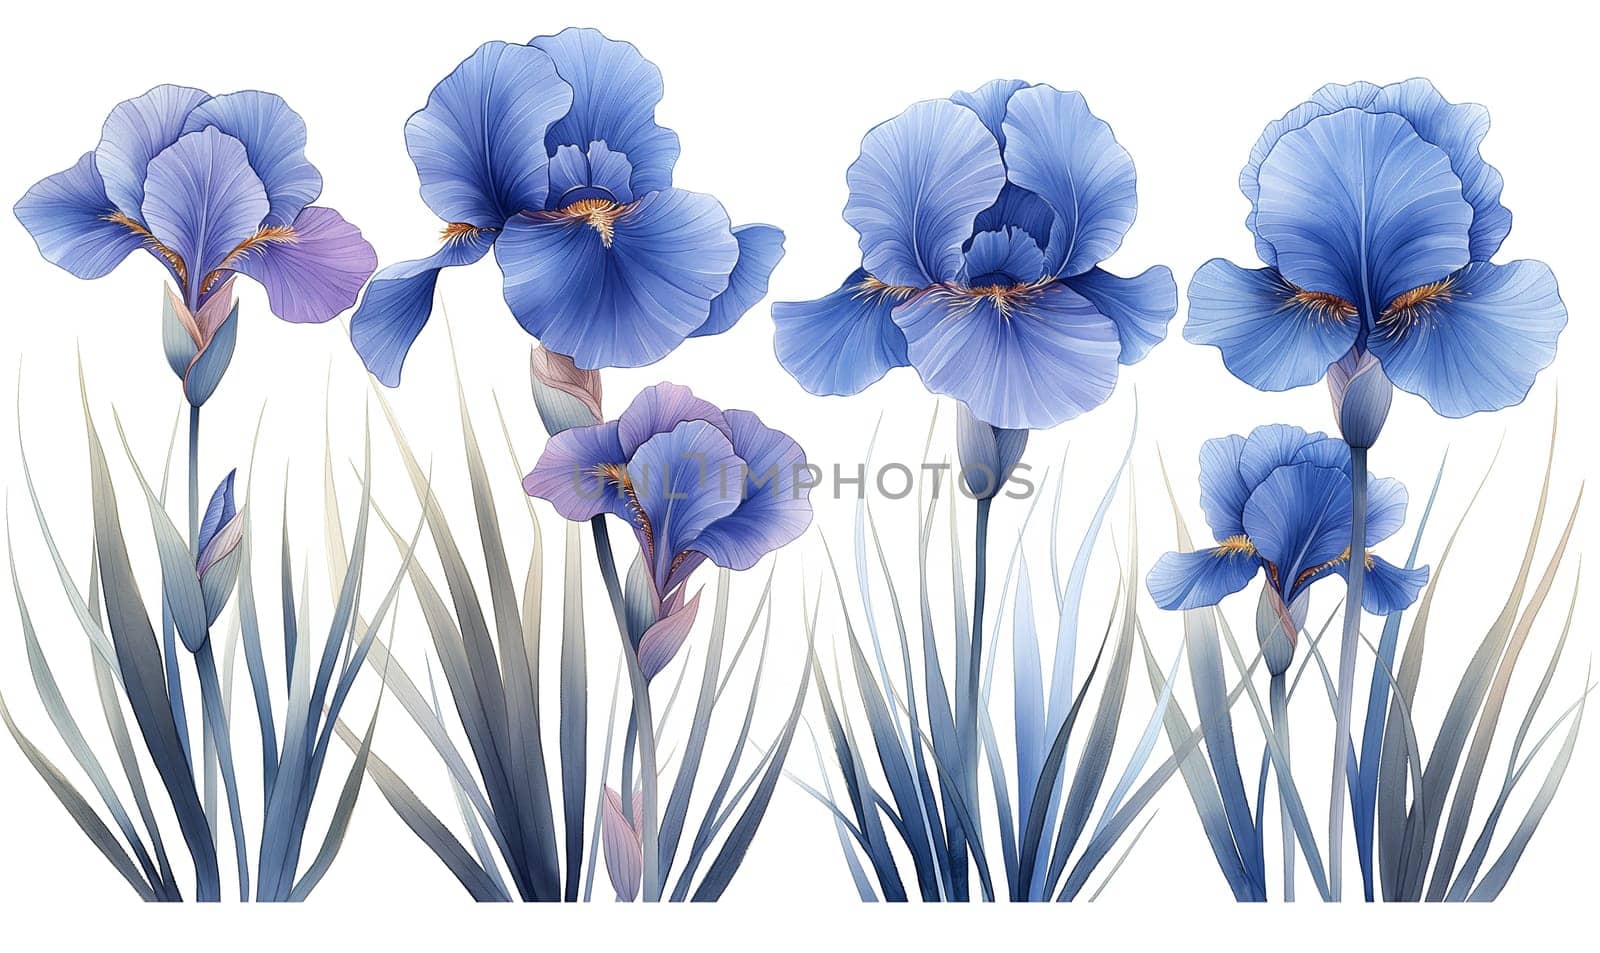 Irises flowers on a white background. by Fischeron